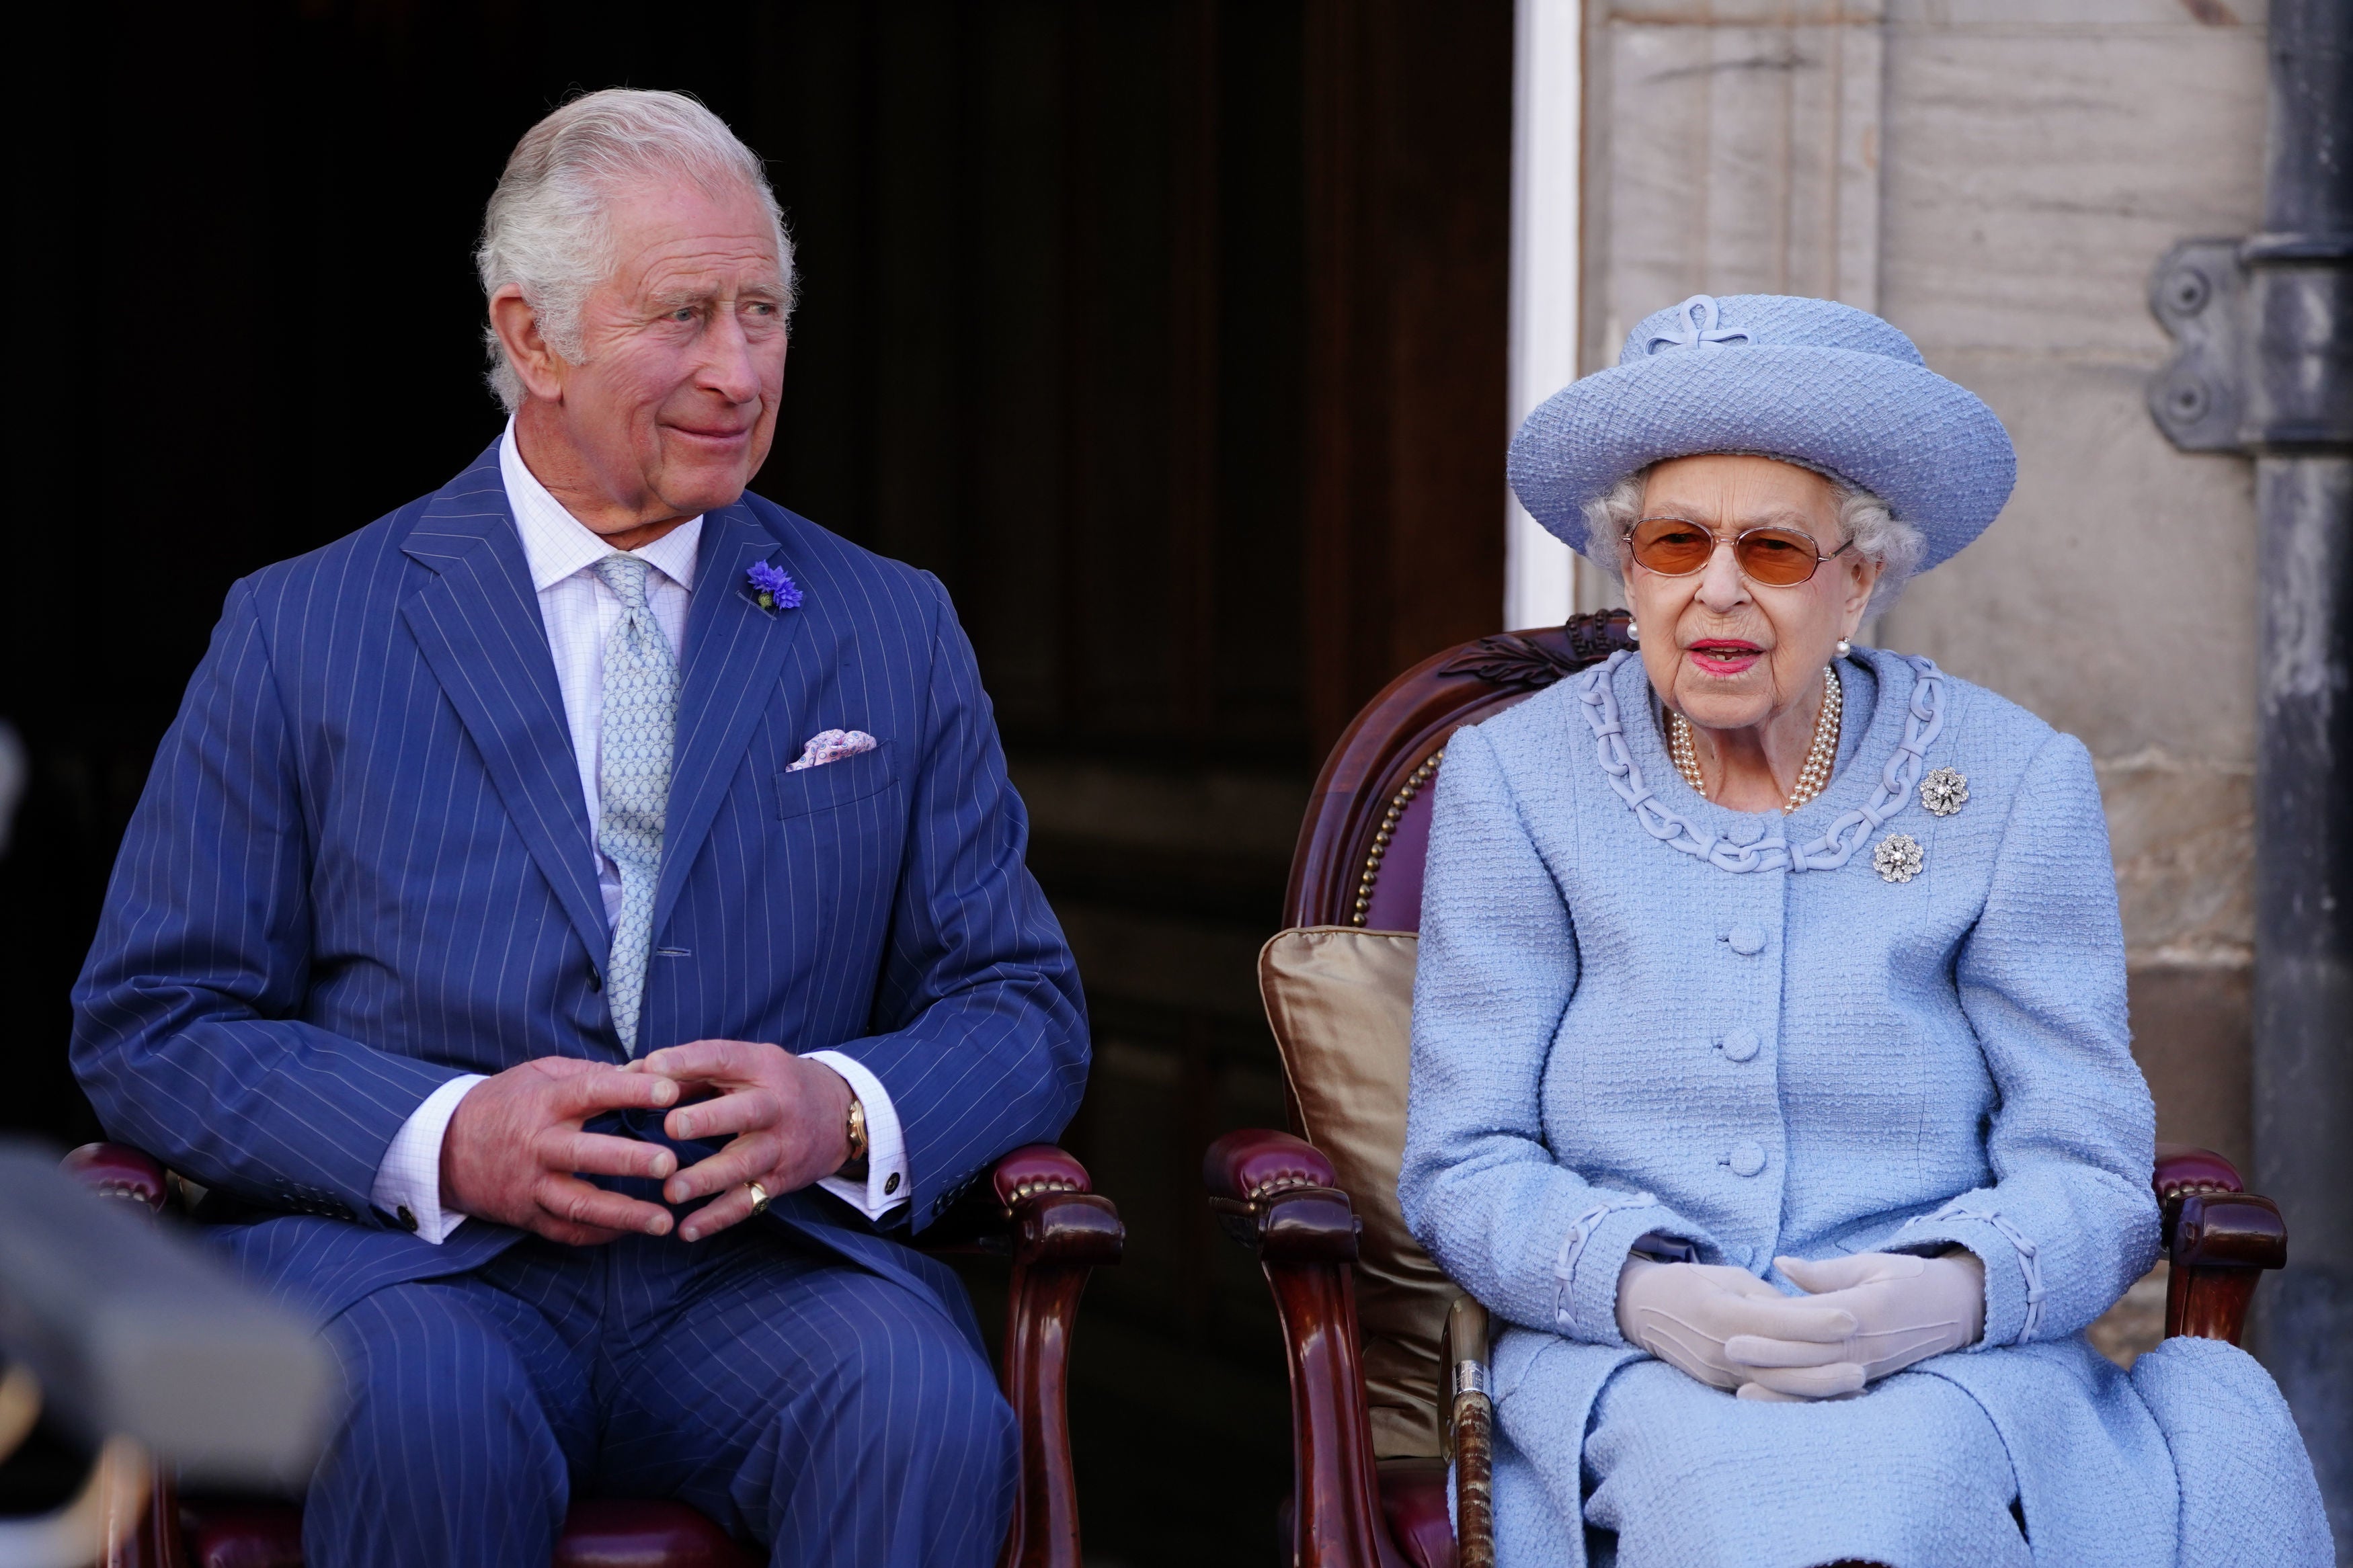 The Prince of Wales and the Queen in June